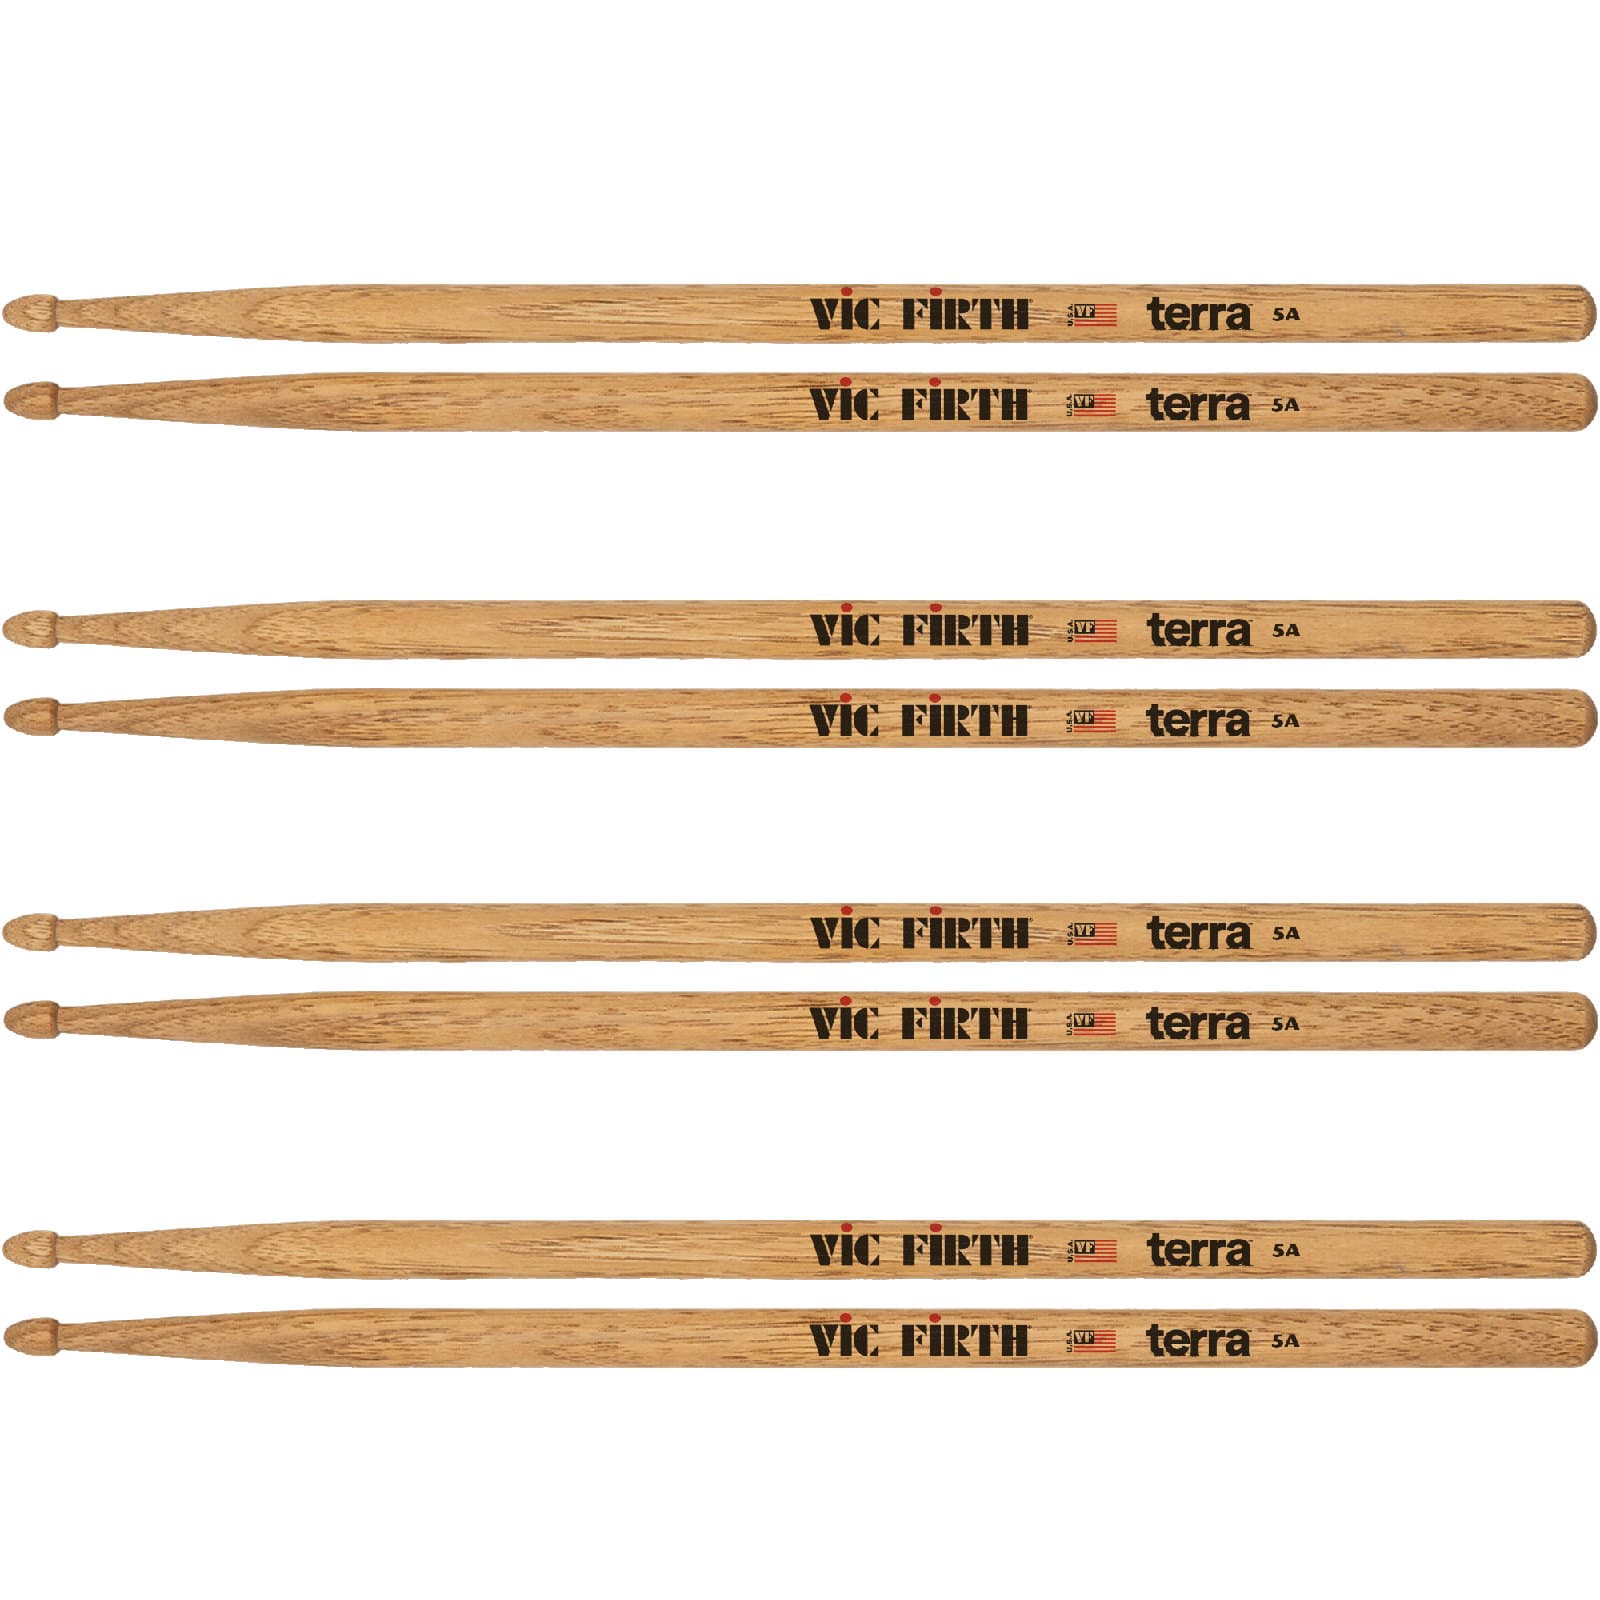 VIC FIRTH PACK 4 PAIRS 5A AMERICAN CLASSIC TERRA